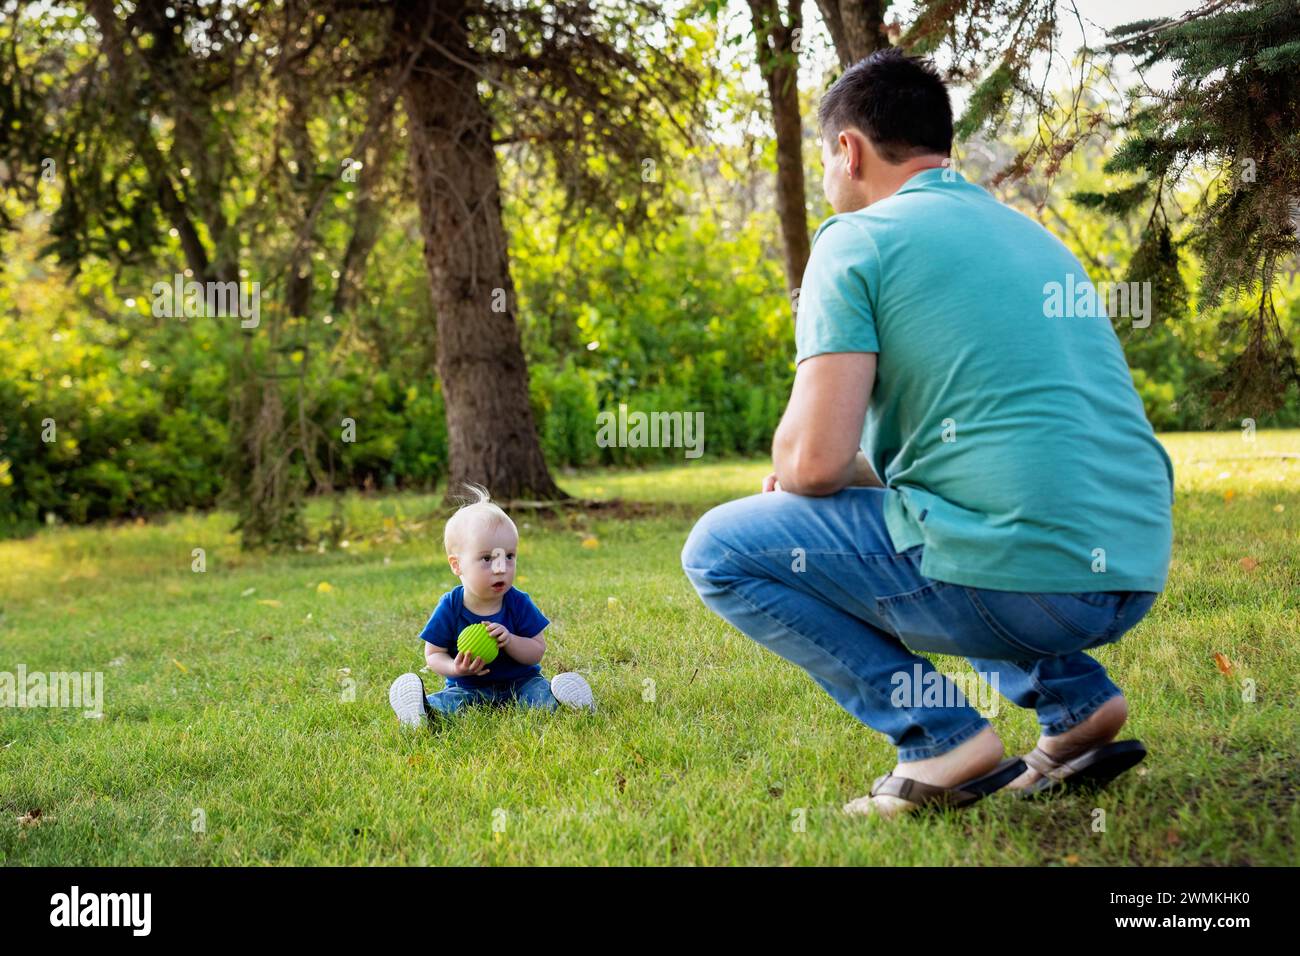 Father spending quality time and throwing a ball with his young son who has Down Syndrome, in a city park during a warm fall afternoon Stock Photo